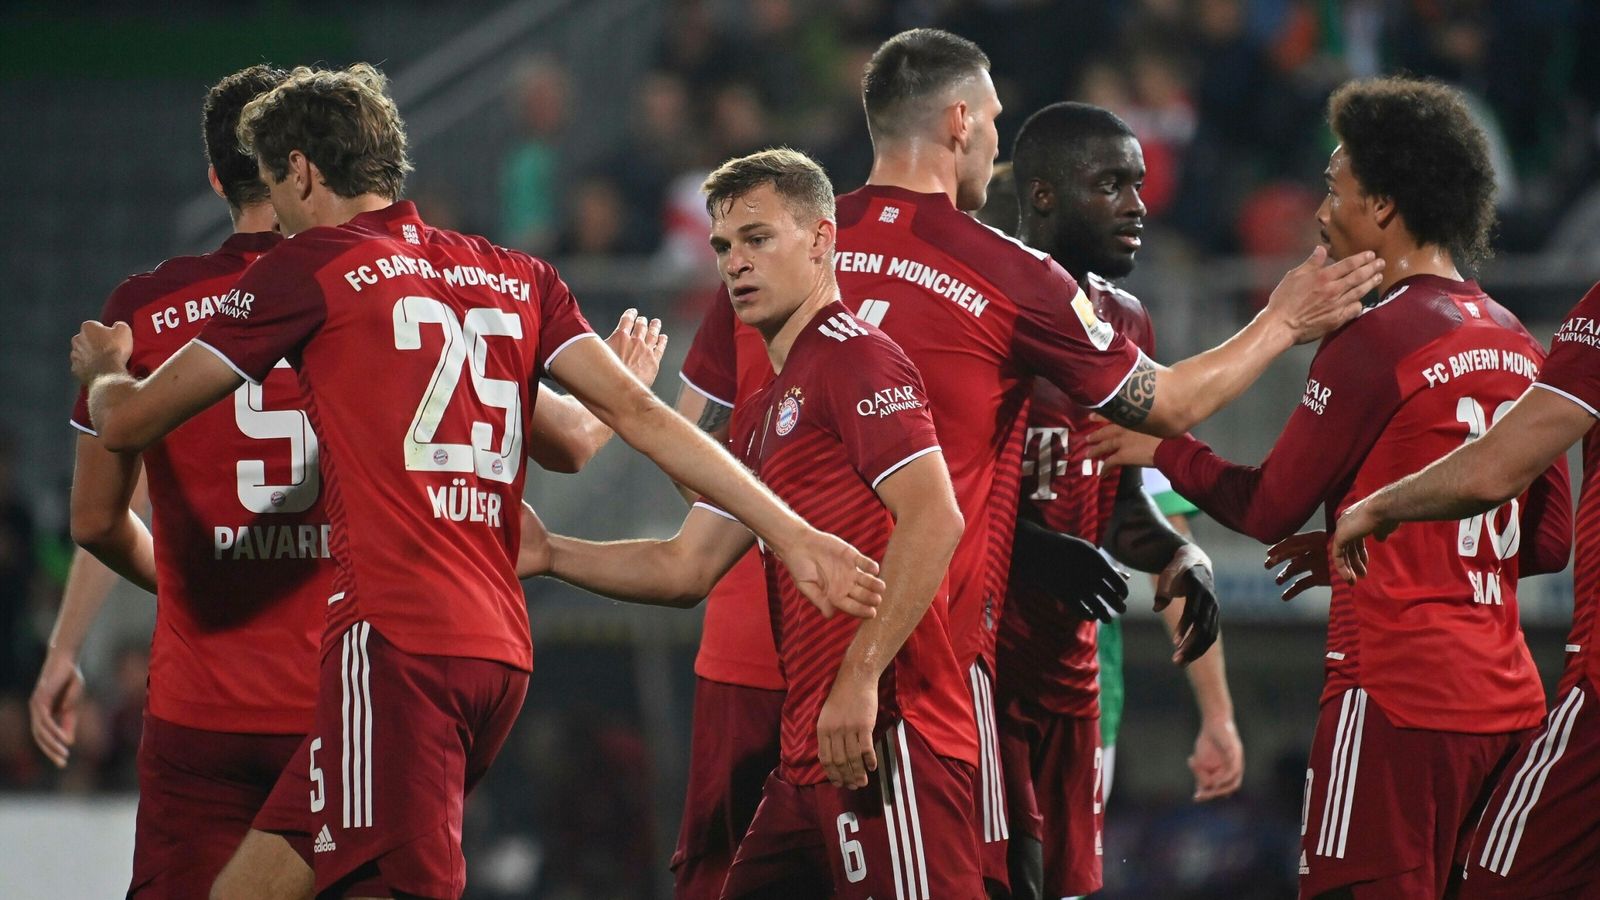 Greuther Furth 1-3 Bayern Munich: open up three-point lead at summit Football News | Sky Sports